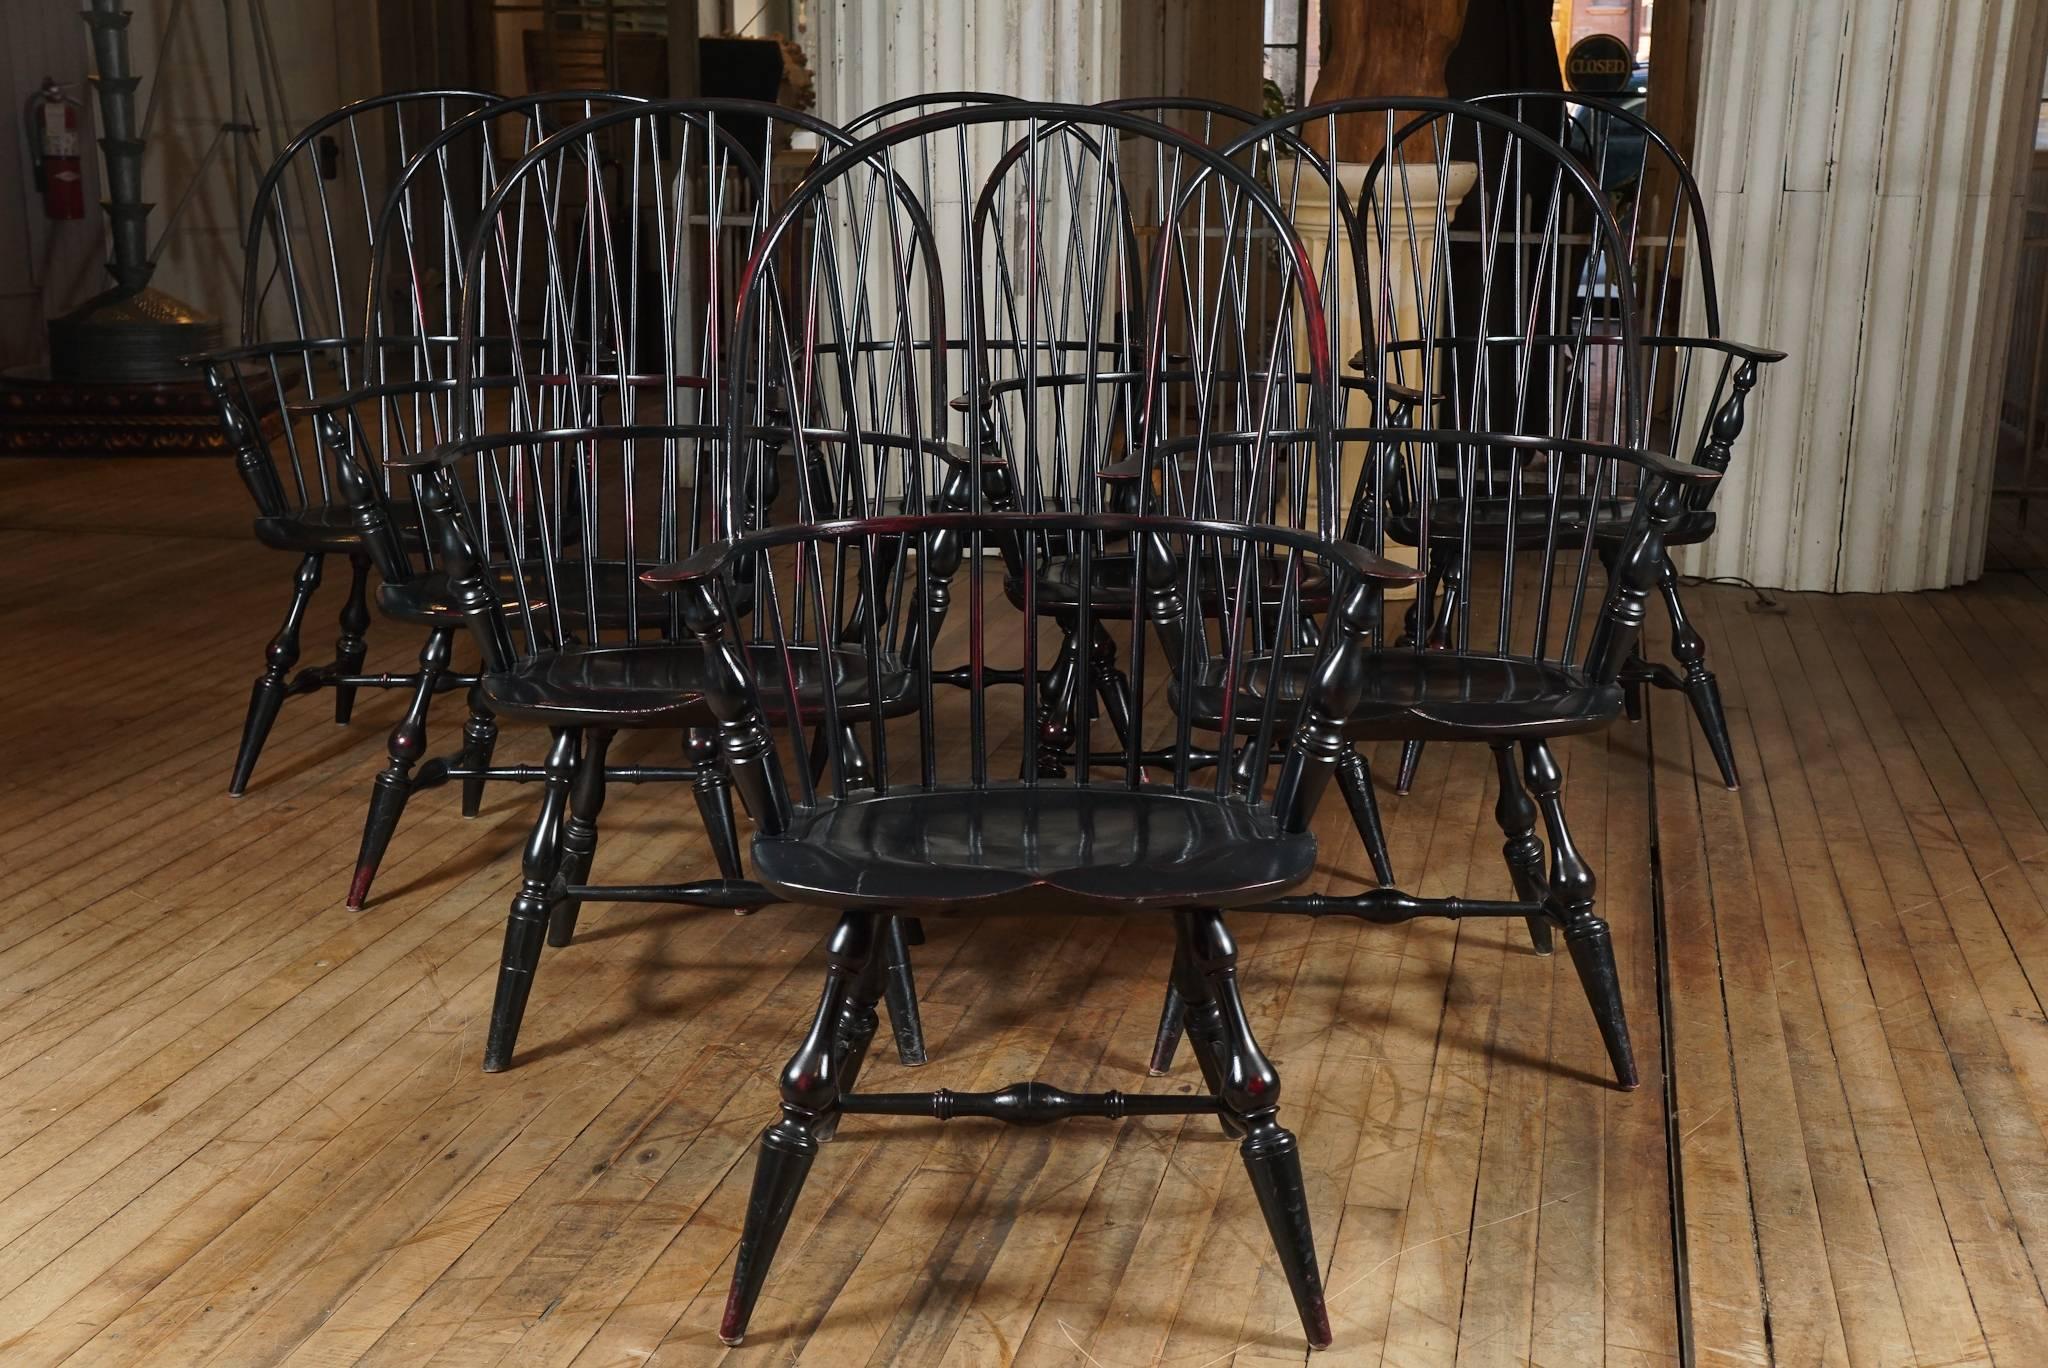 Set of eight sack back windsor armchairs, by the Riverbend Chair Co. Ohio. Black crackle surface over red, approximately 15 years old. Originally sold for @ $950. Decommissioned from a library - three sets of eight available.